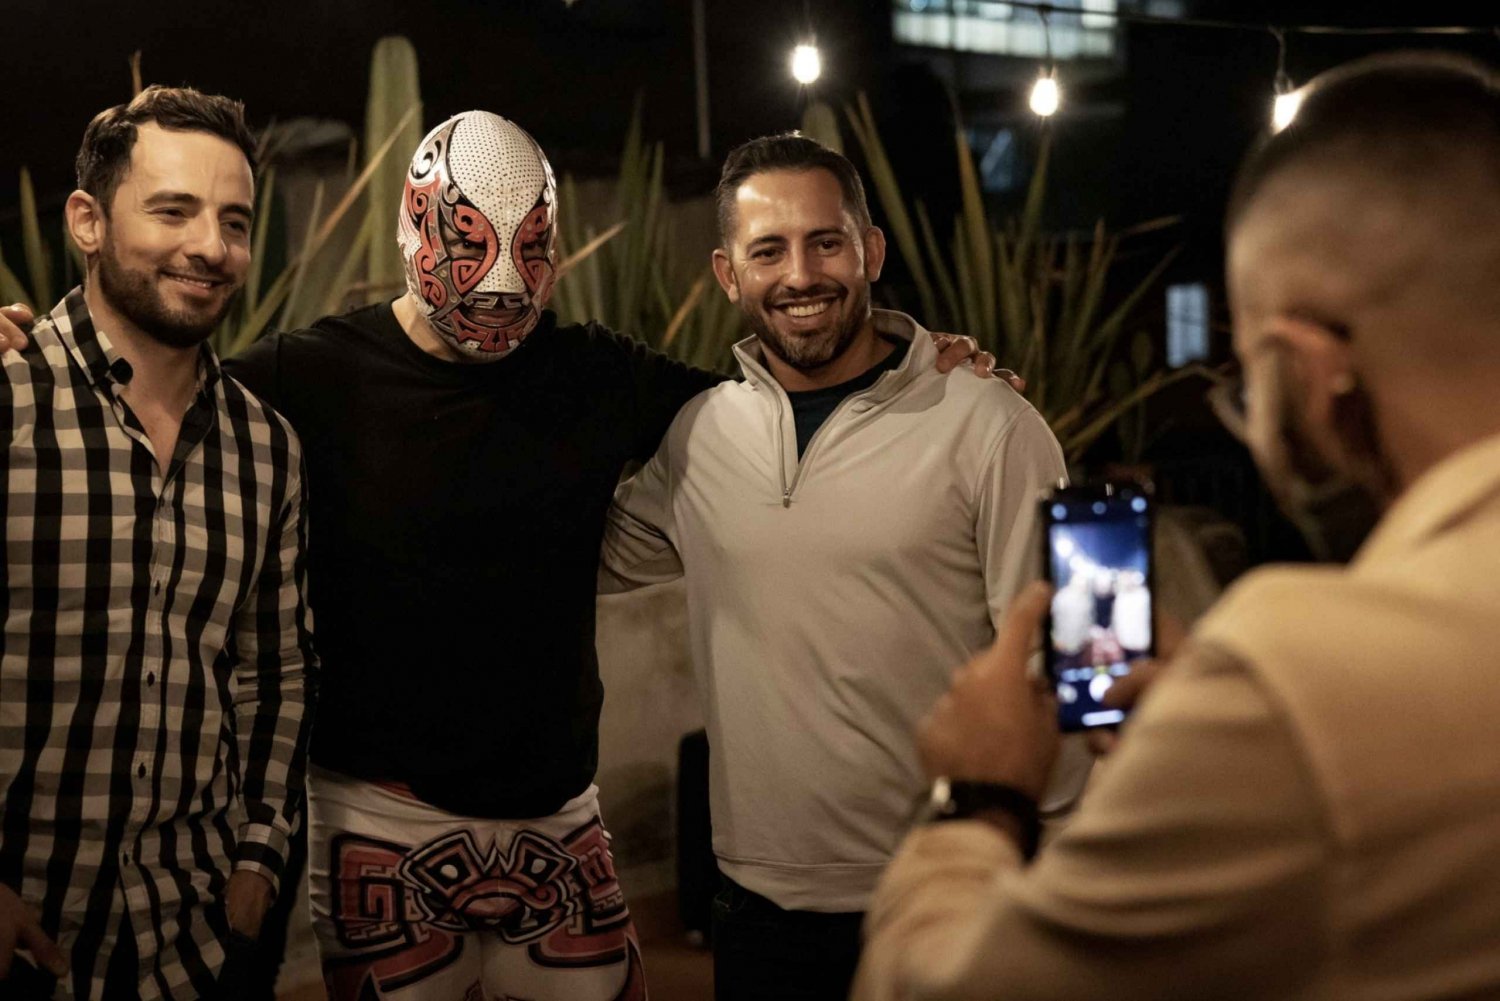 Incredible Lucha libre-Meet&Greet, Unlimited Drinks and food